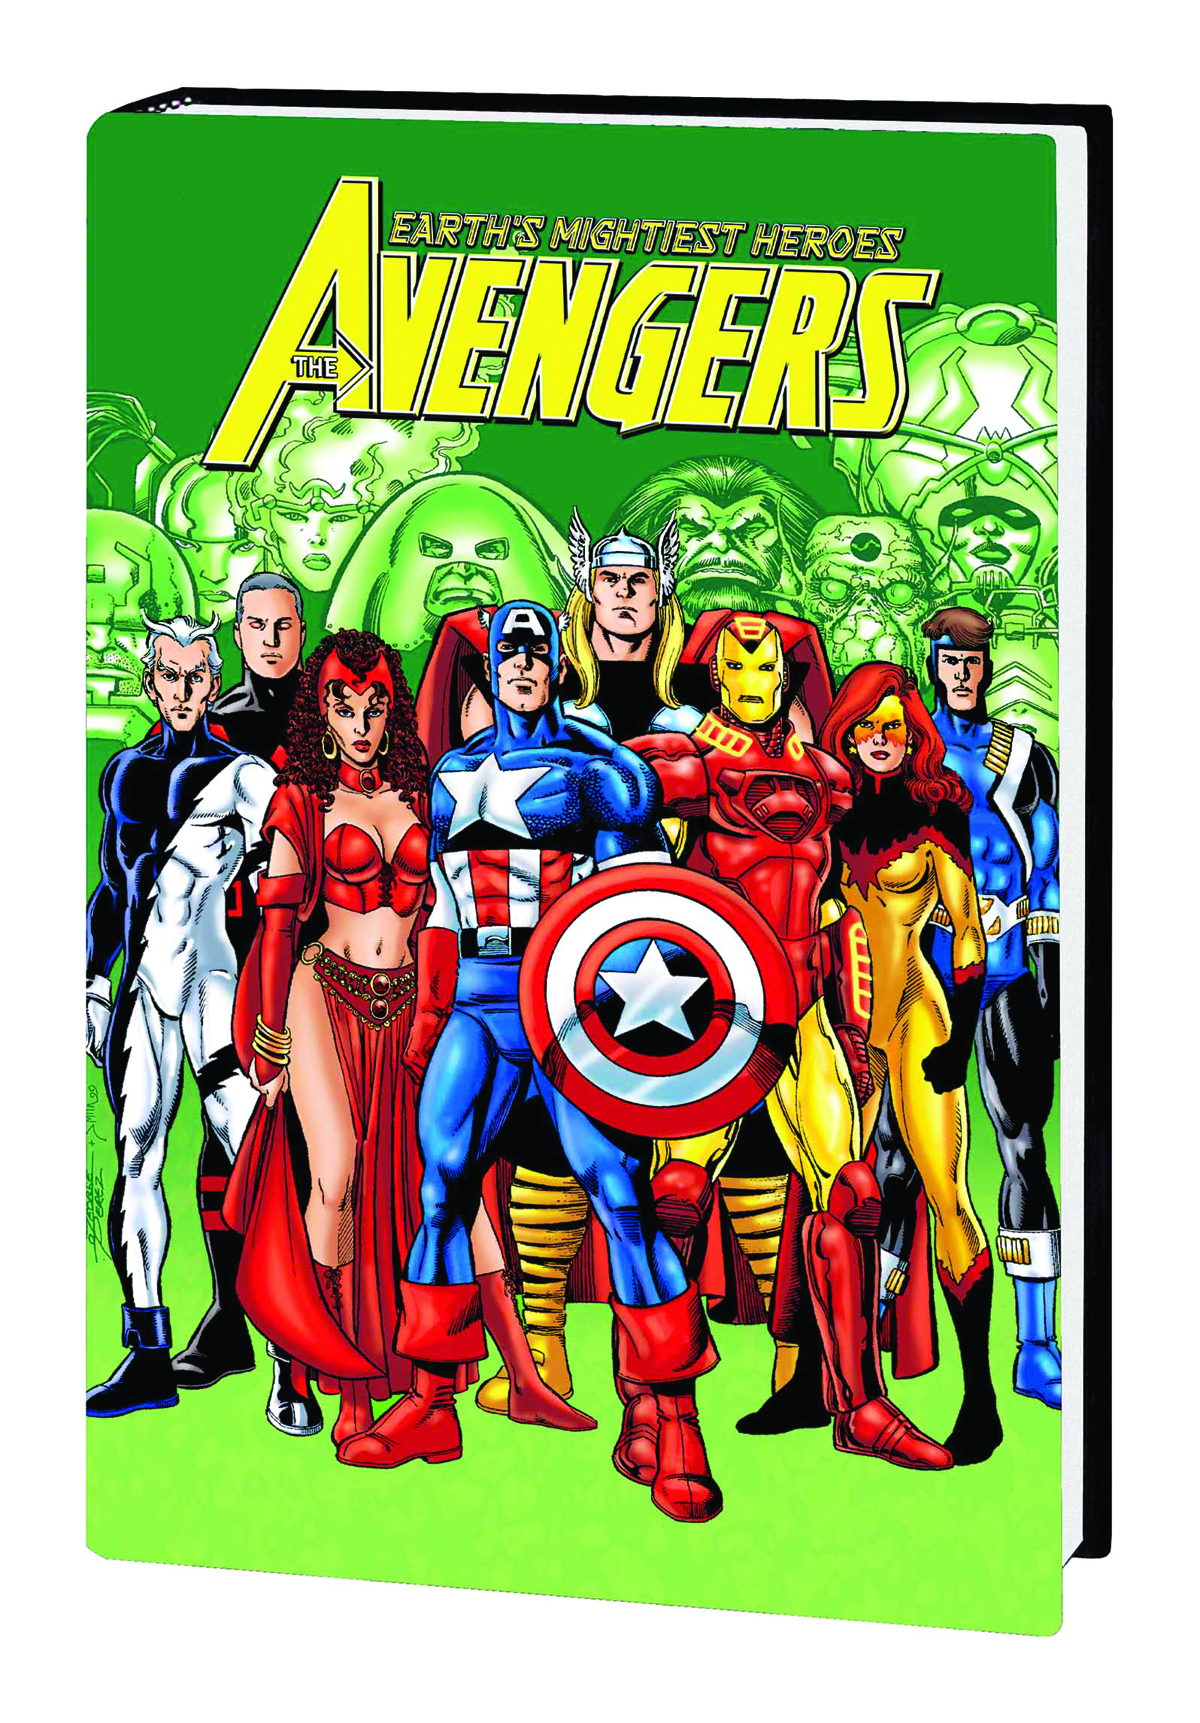 AVENGERS BY BUSIEK AND PEREZ OMNIBUS HC VOL 02